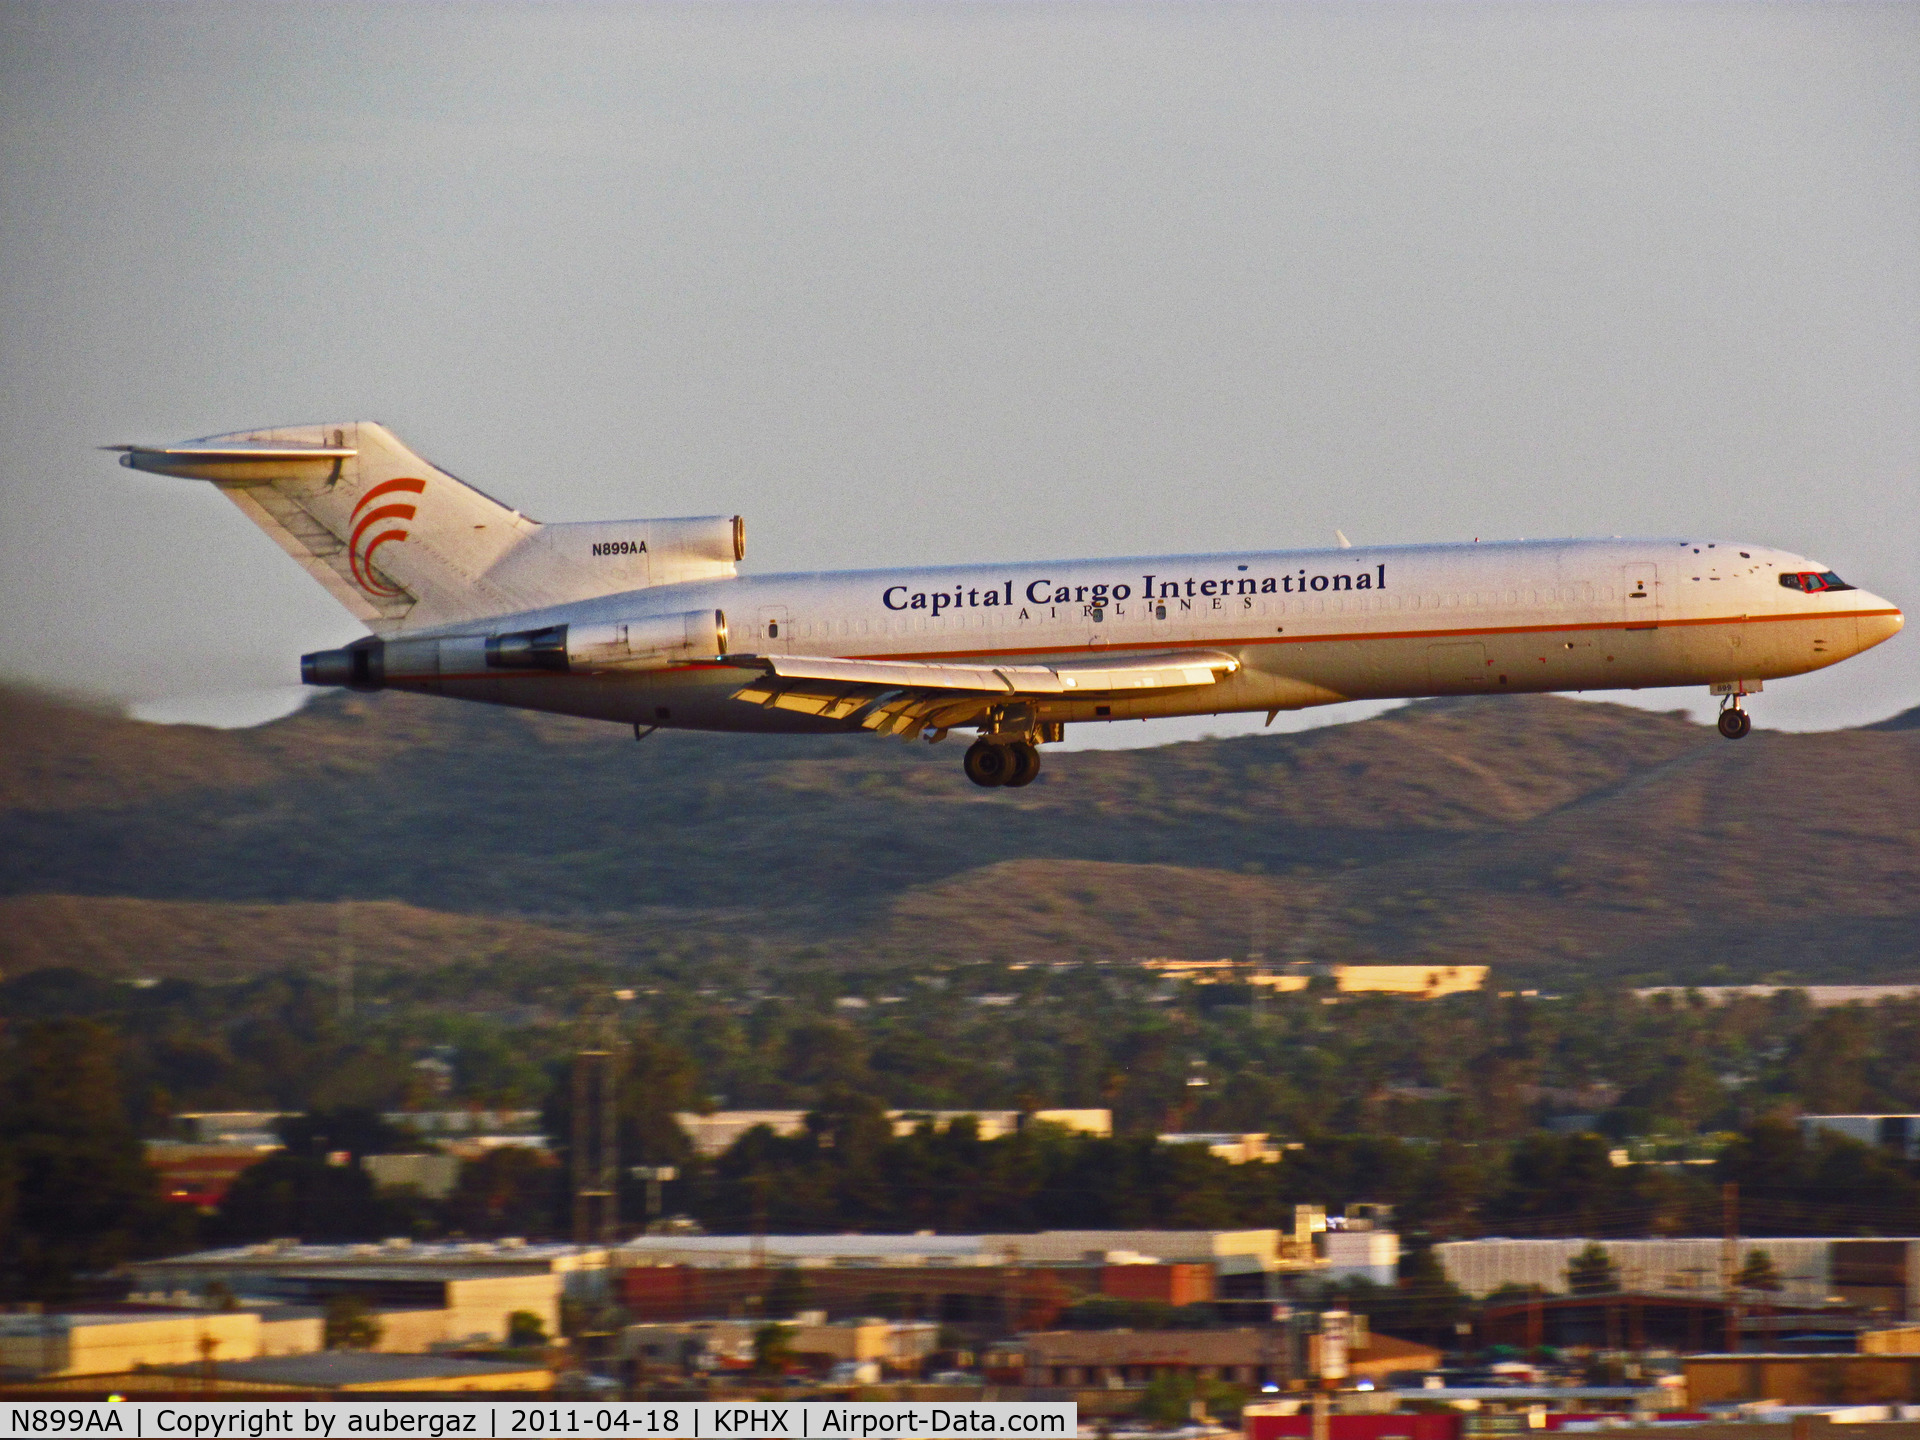 N899AA, 1980 Boeing 727-223 C/N 22015, Early evening arrival at PHX